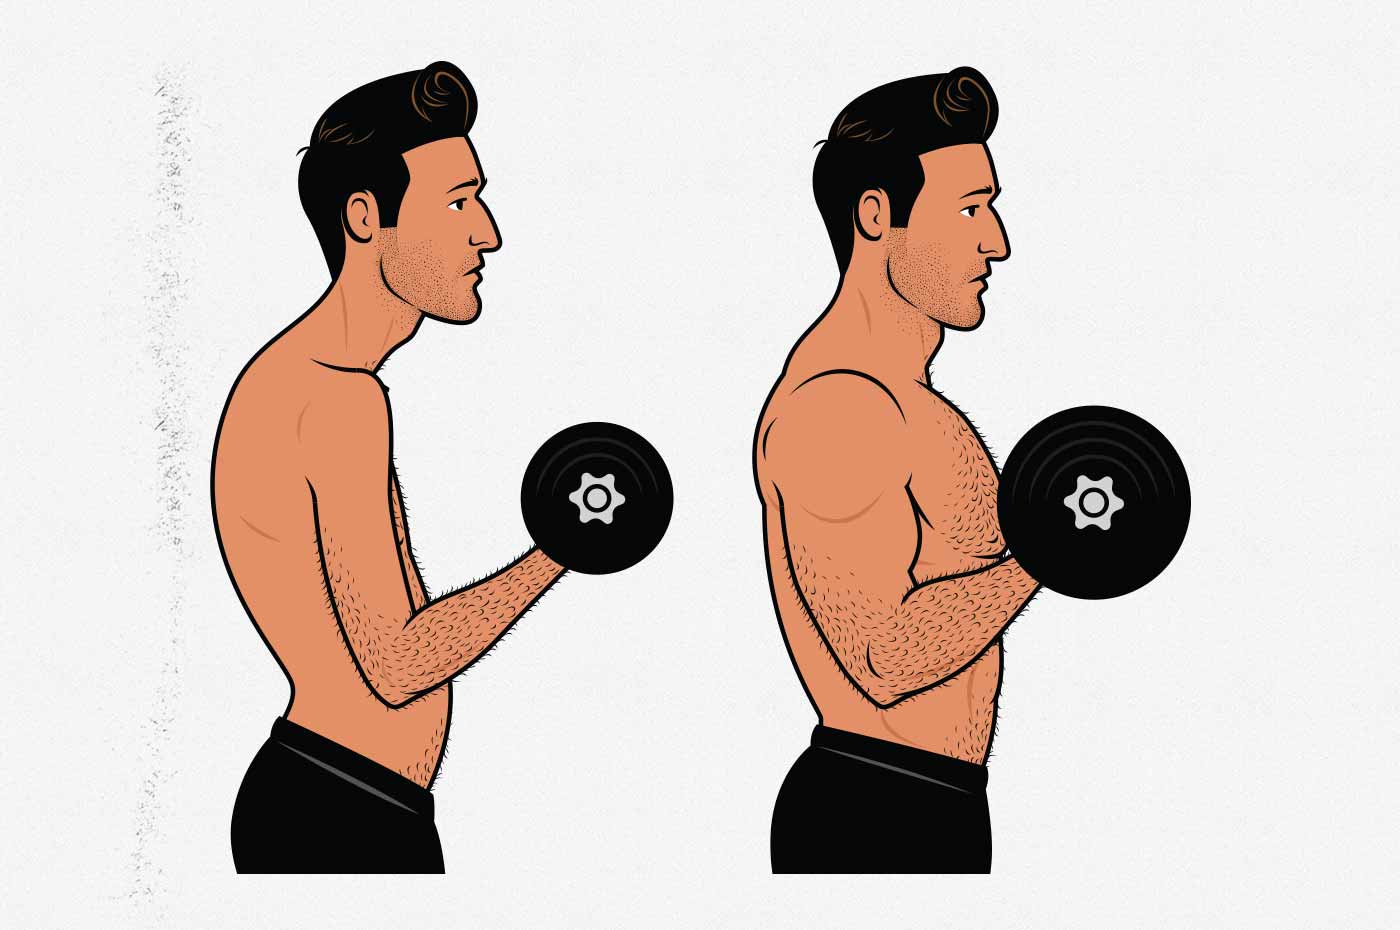 Illustration of a skinny guy becoming muscular from doing biceps curls.